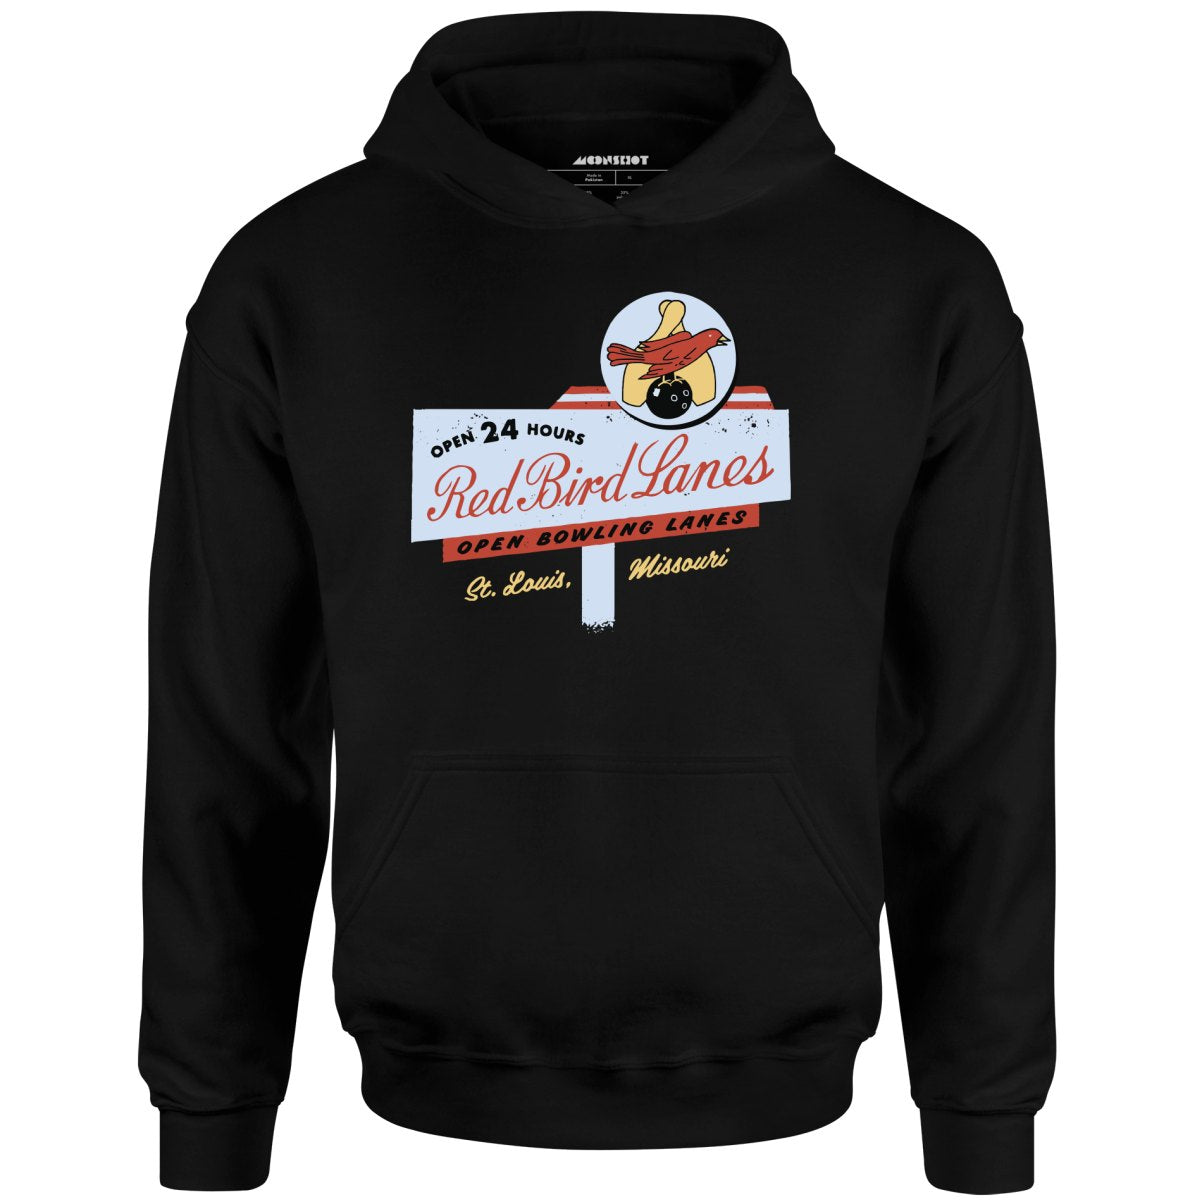 Red Bird Lanes v2 - St. Louis, MO - Vintage Bowling Alley - Unisex Hoodie